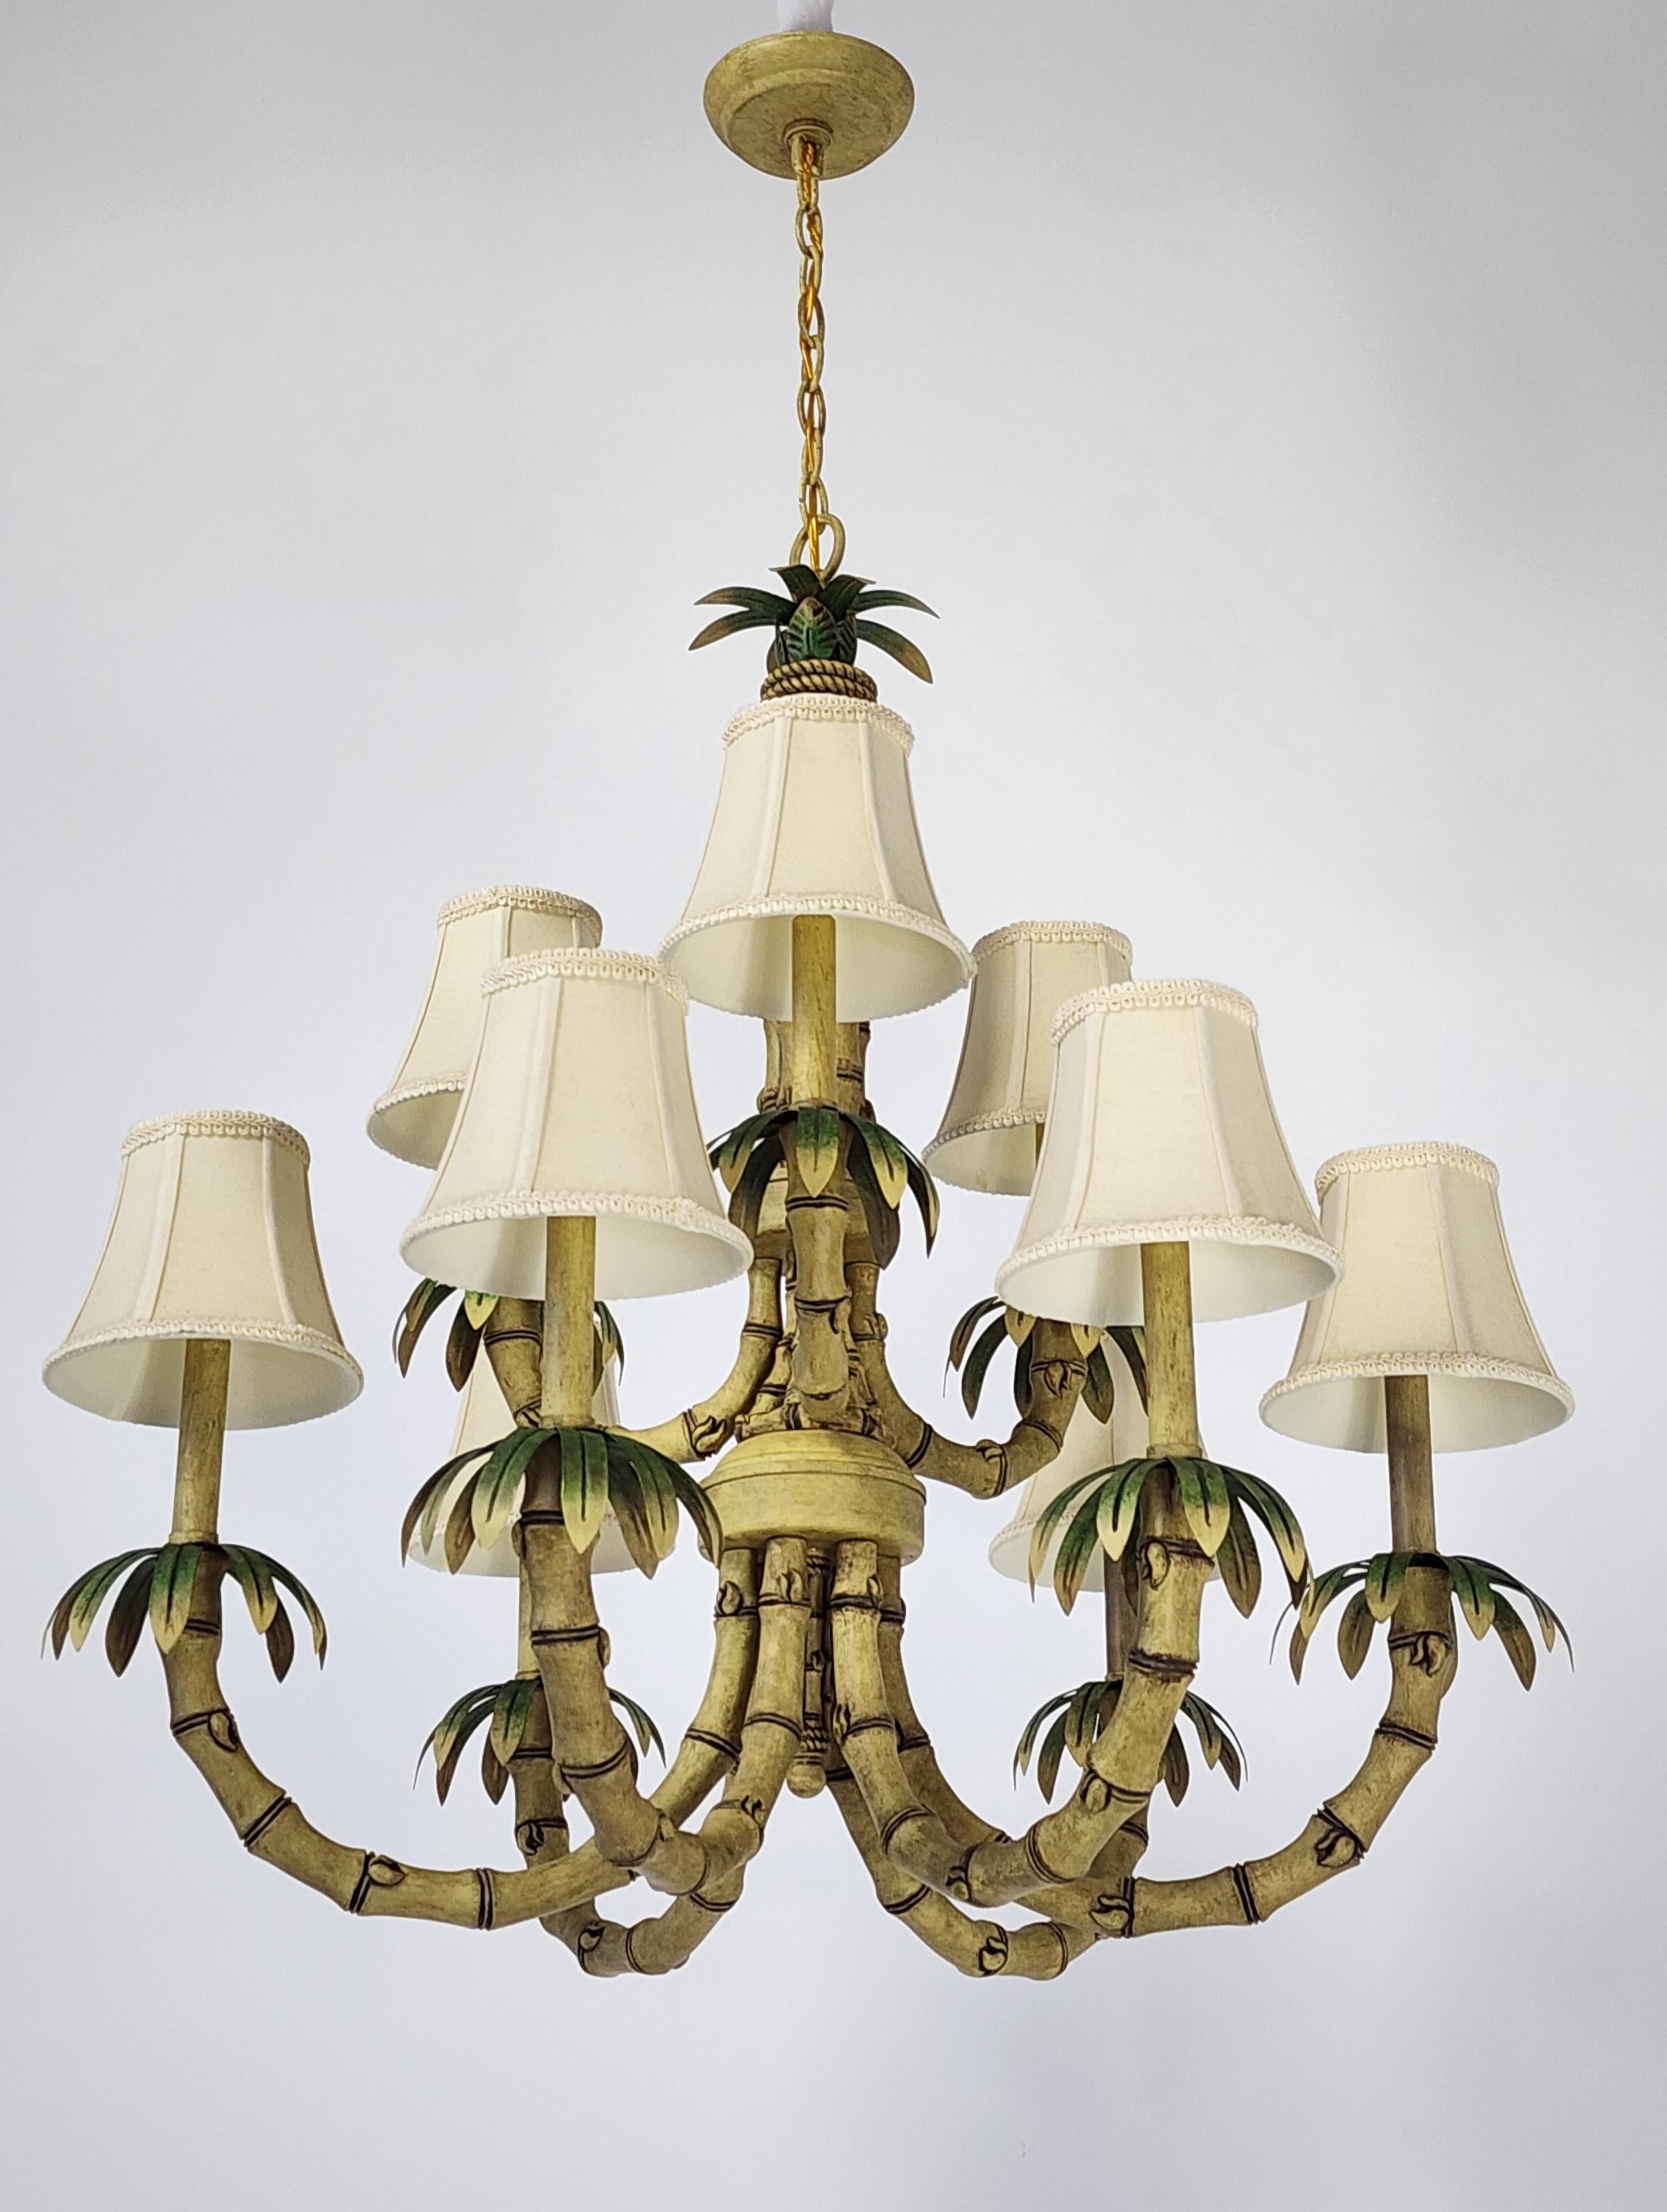 Extremely well made faux bamboo chandelier with tole palm leafs . 

Solid sturdy construction. 

Contain 9 candelabra sockets rated at 40 watt each. 

Pictured shade  come with order  . 

Chain lenght is 10 in.   for a total drop of 43 in.  Could be